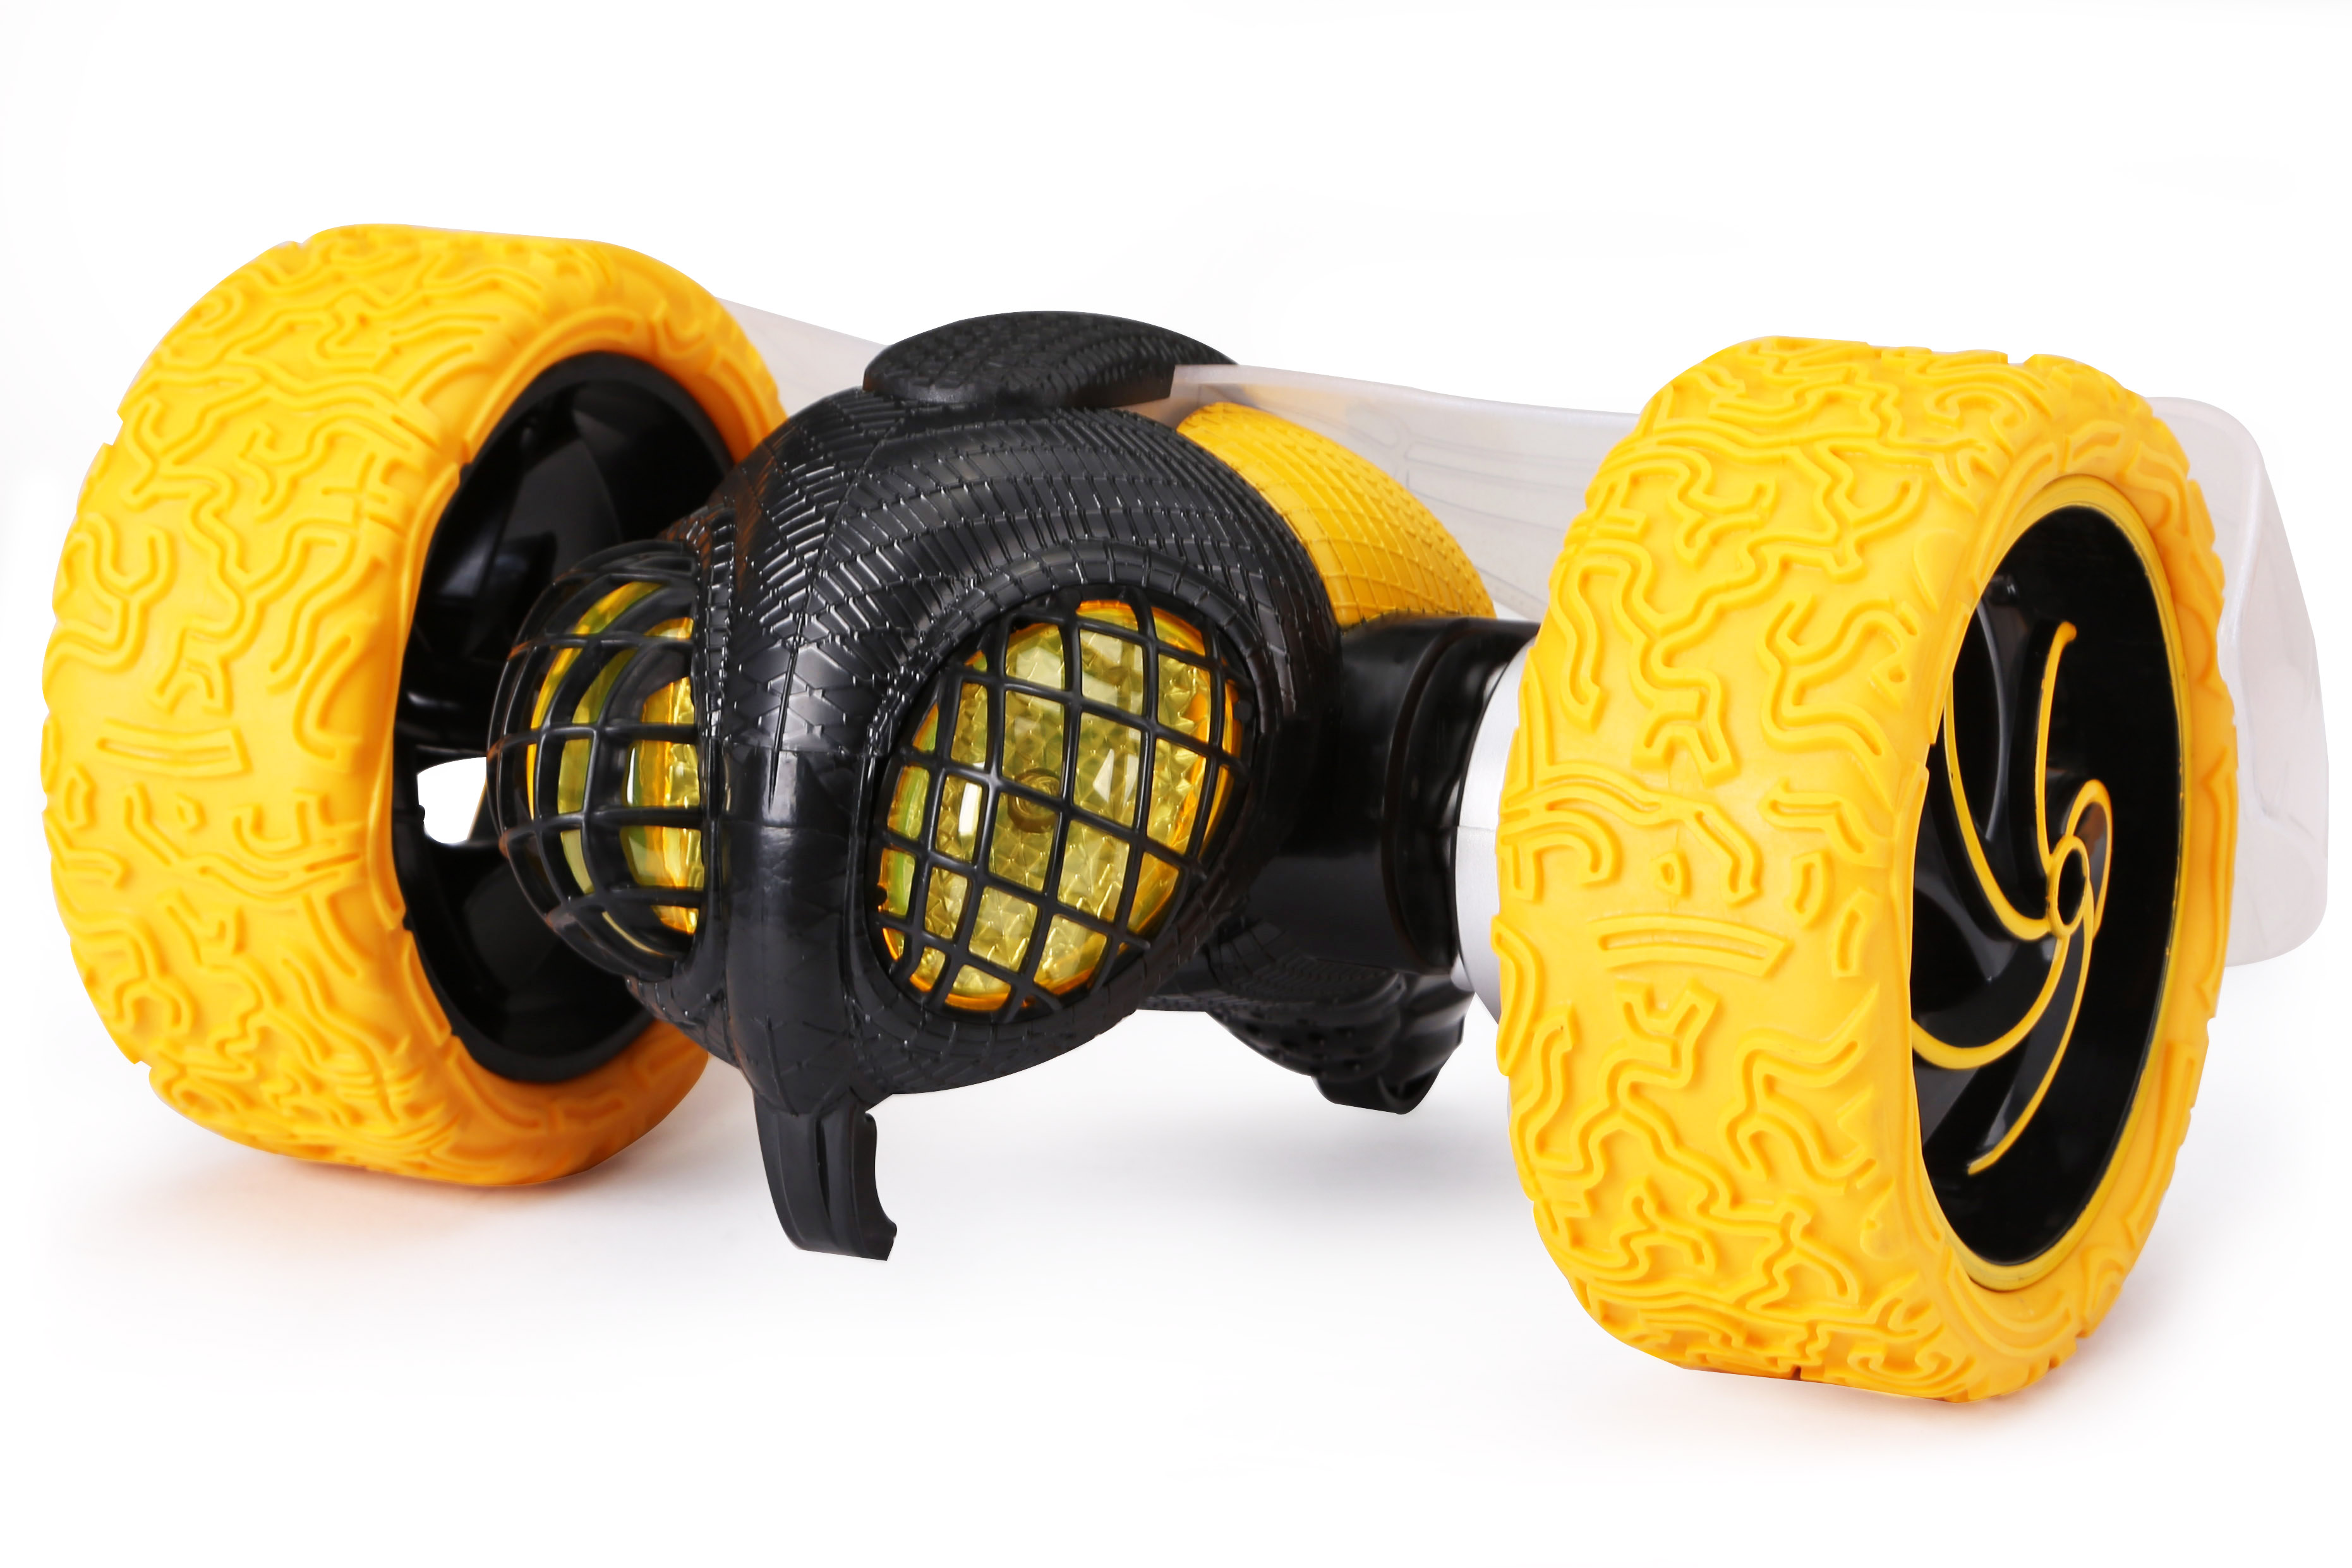 New Bright RC Stunt Radio Controlled TumbleBee with Light Up Eyes 2.4GHz USB - image 1 of 6